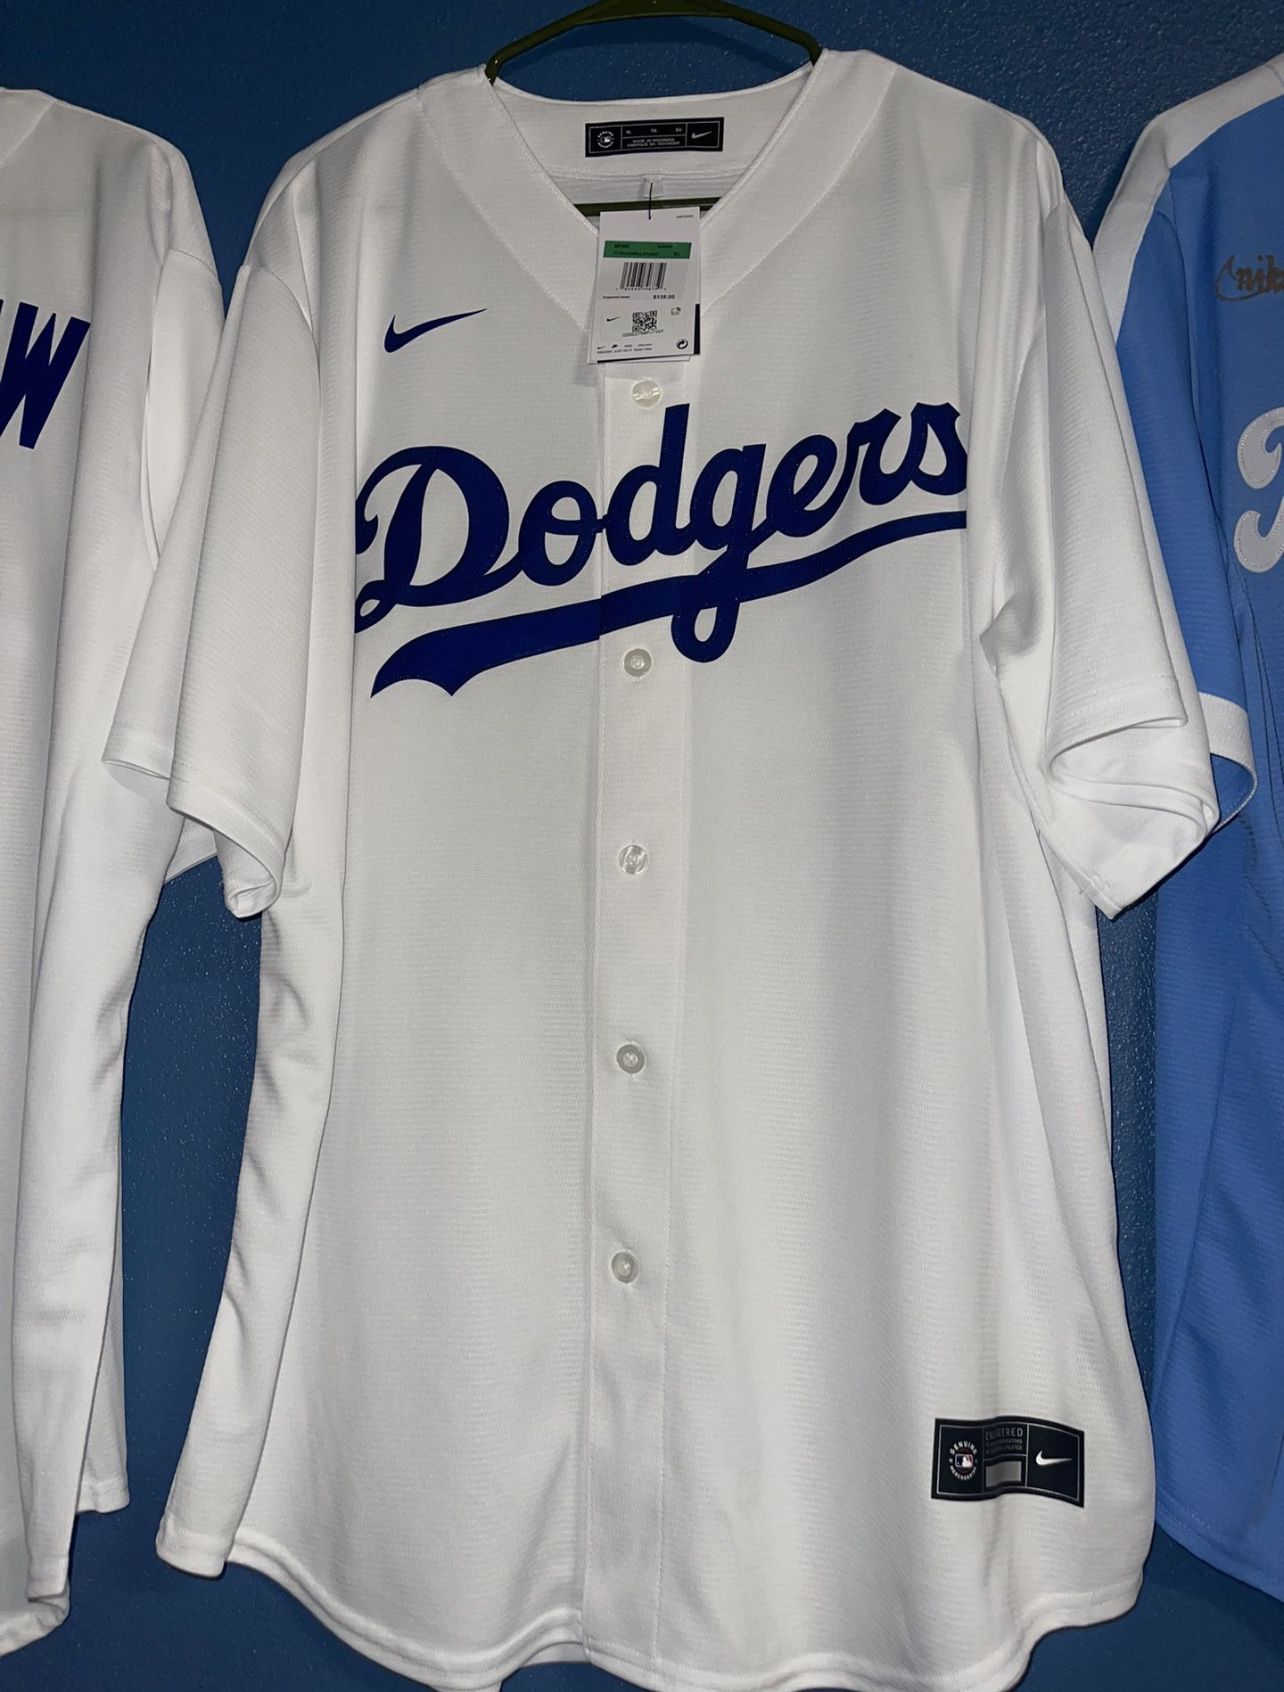 Dodgers Jersey Mookie Betts Authentic for Sale in Whittier, CA - OfferUp